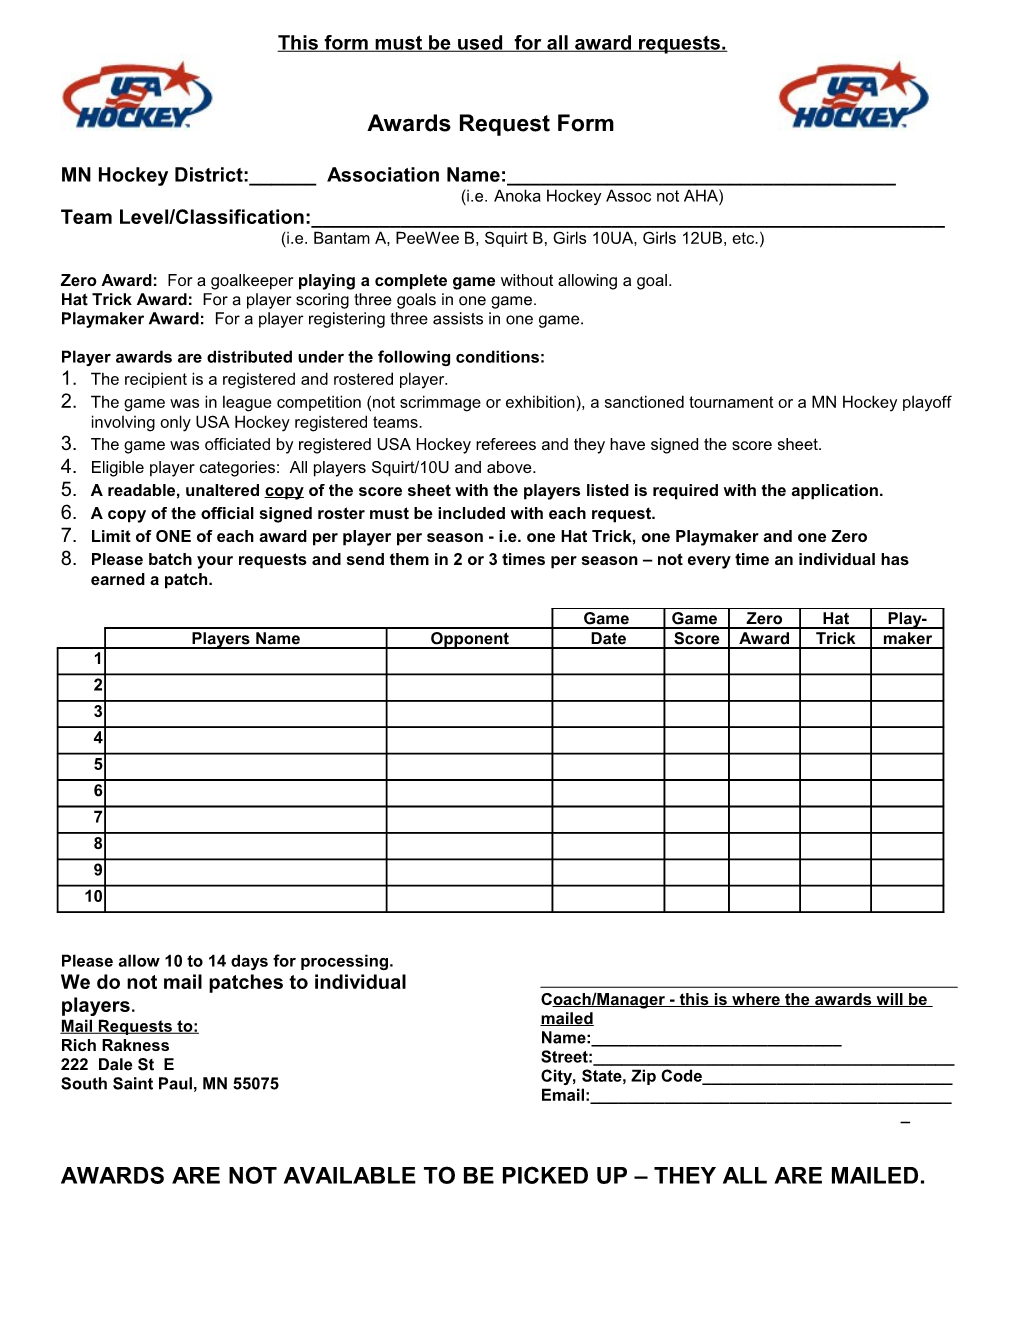 Awards Request Form